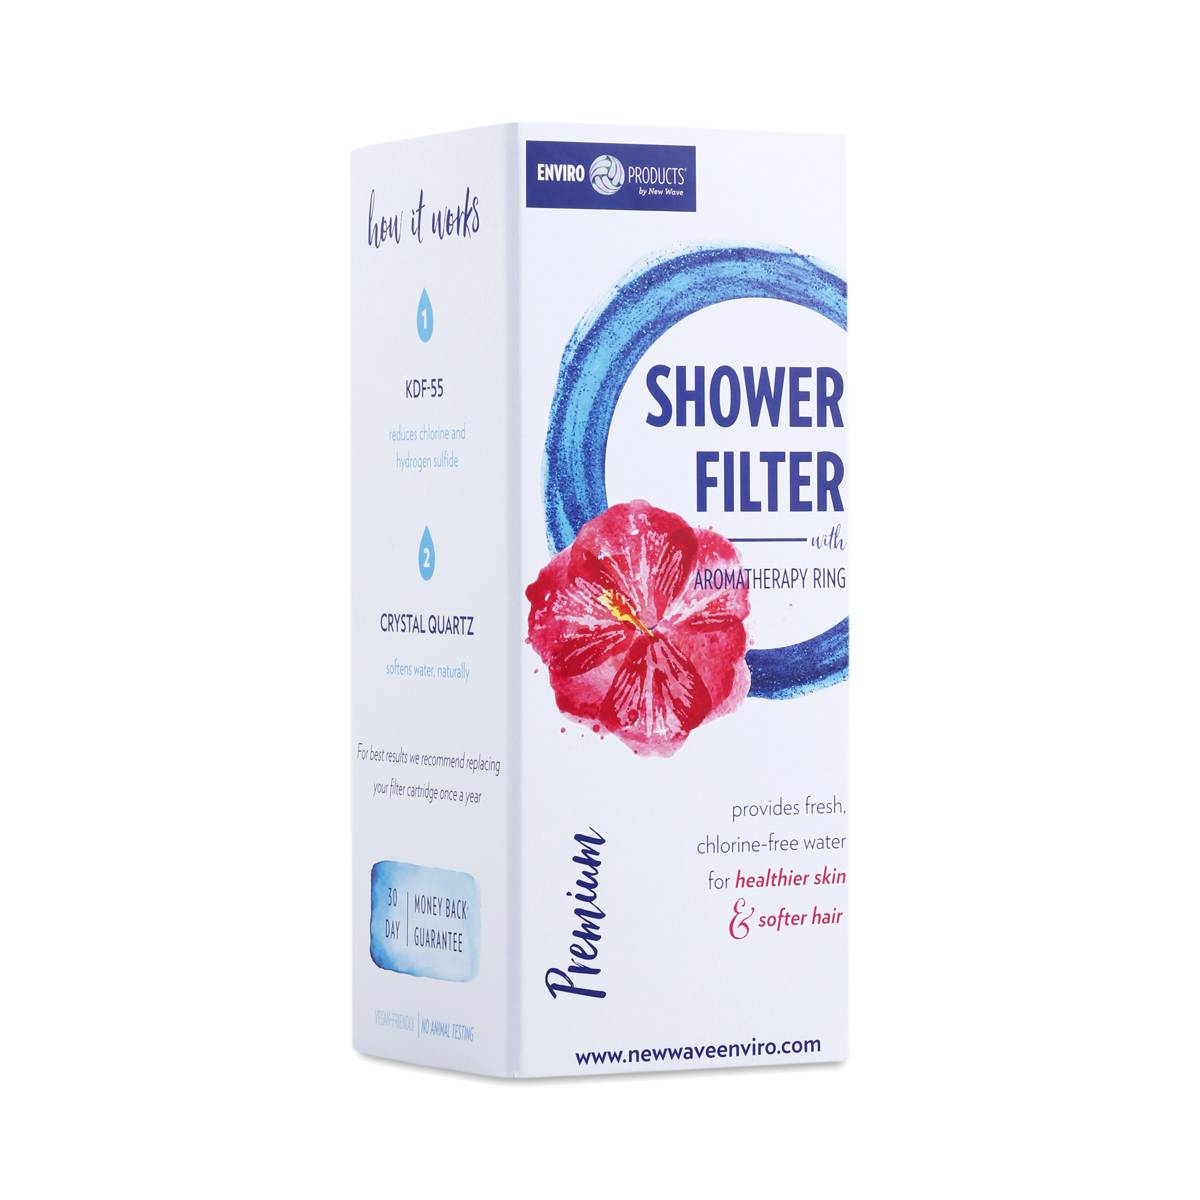 New Wave Enviro Premium Shower Filter System W/ Optional Aromatherapy Ring